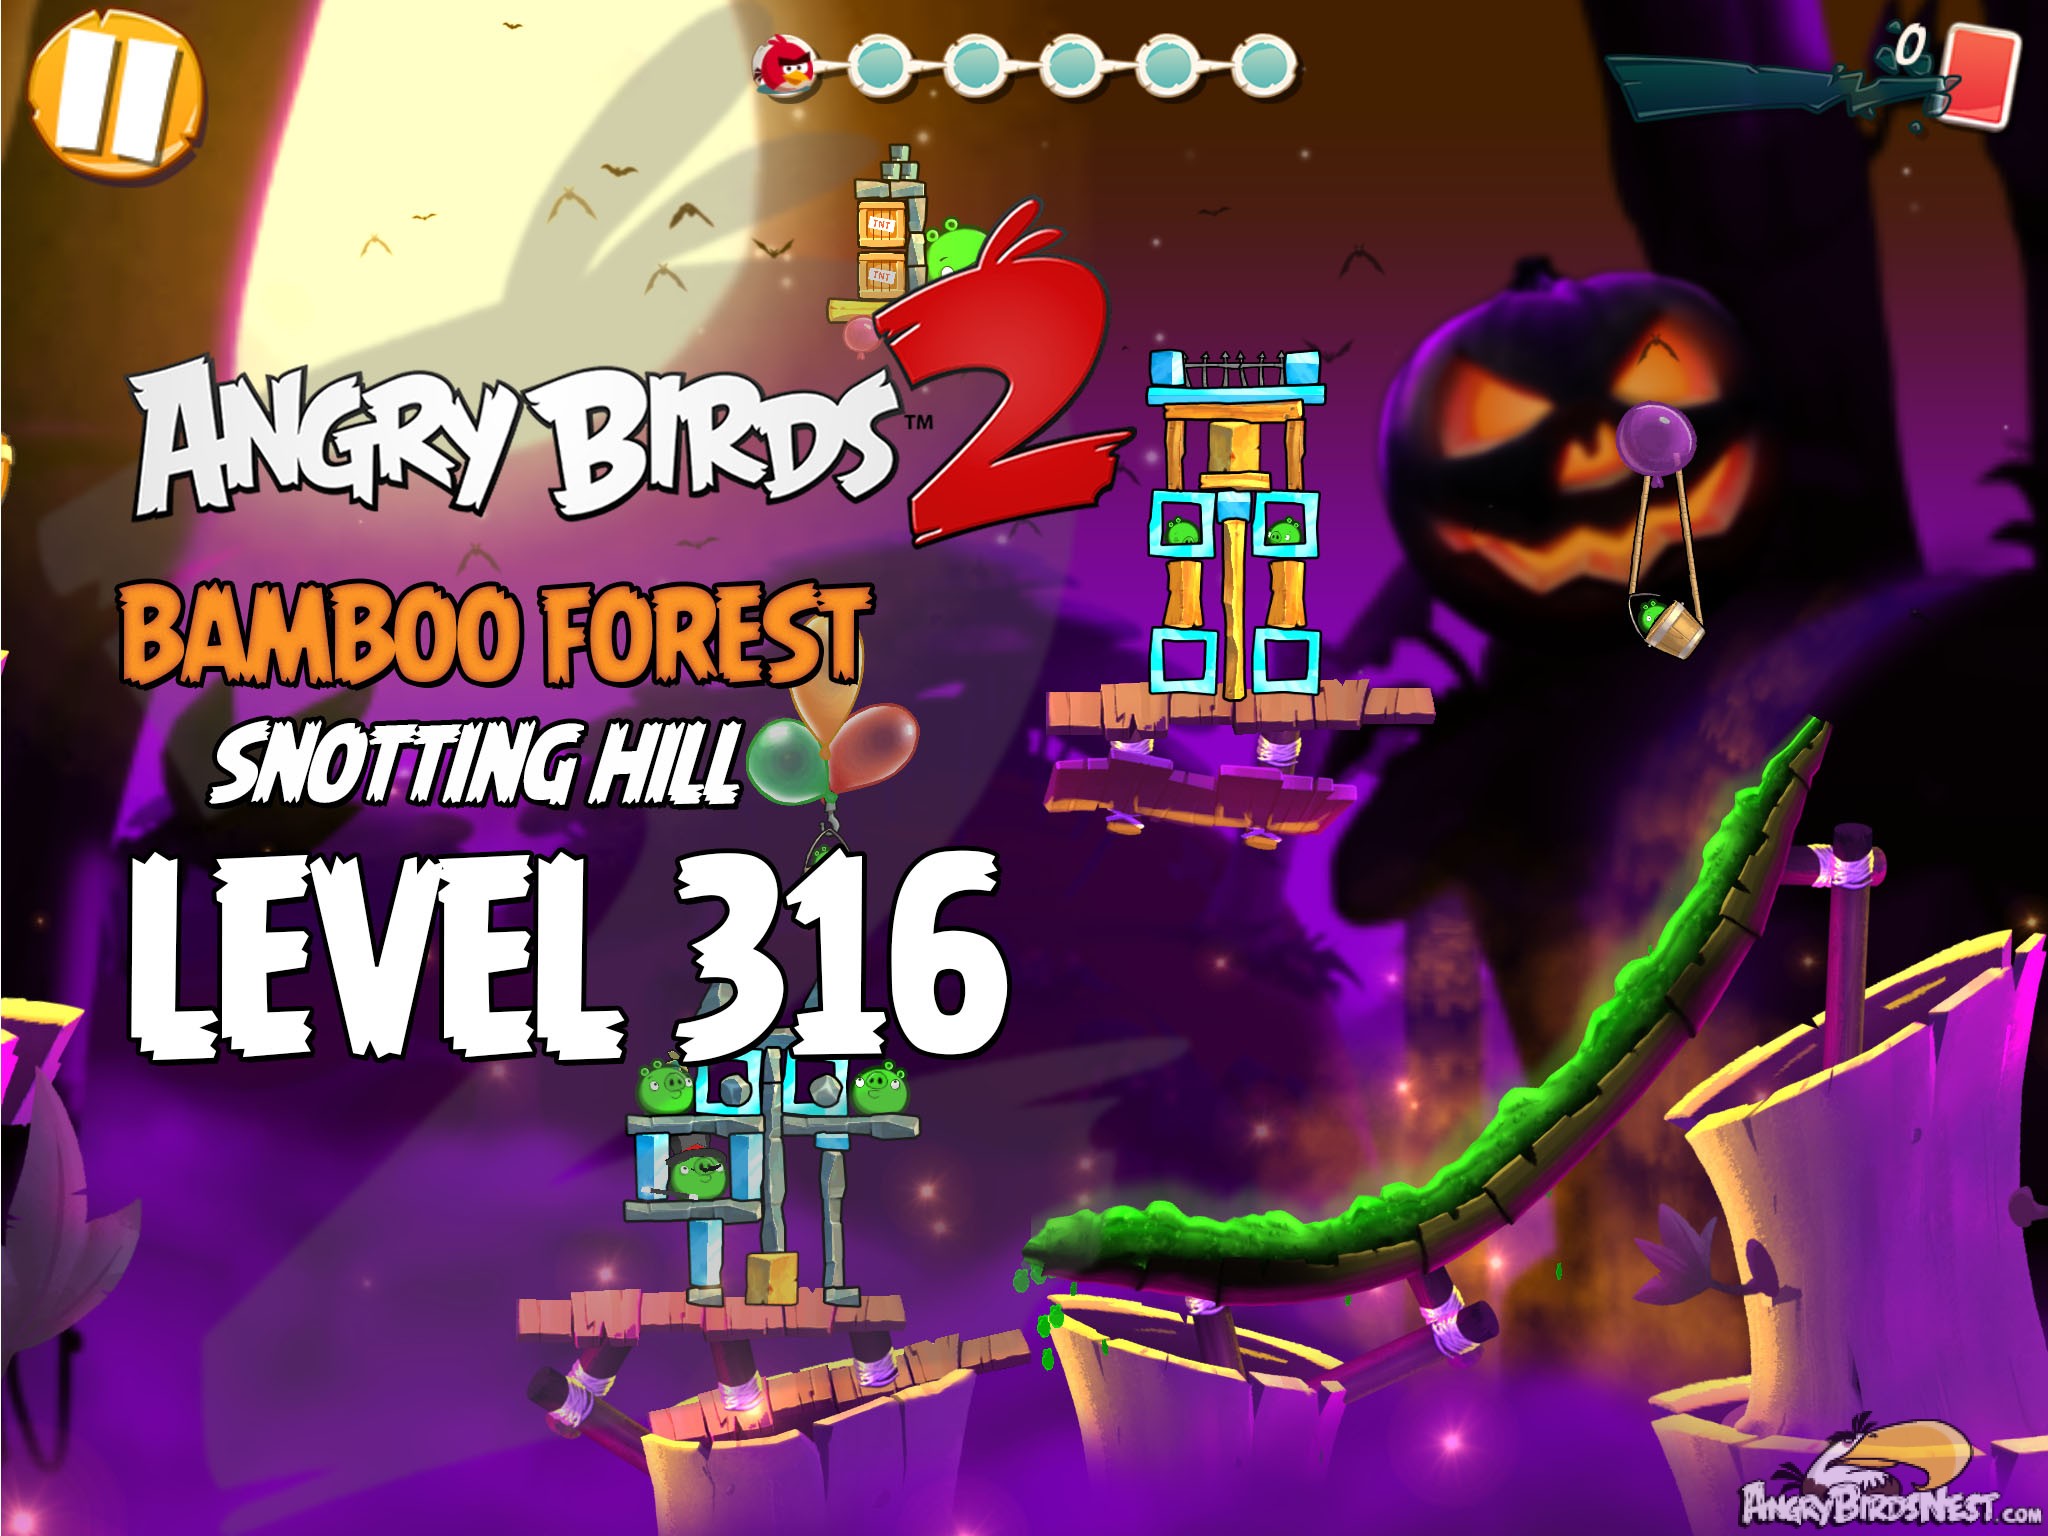 Angry Birds 2 Bamboo Forest Snotting Hill Level 316